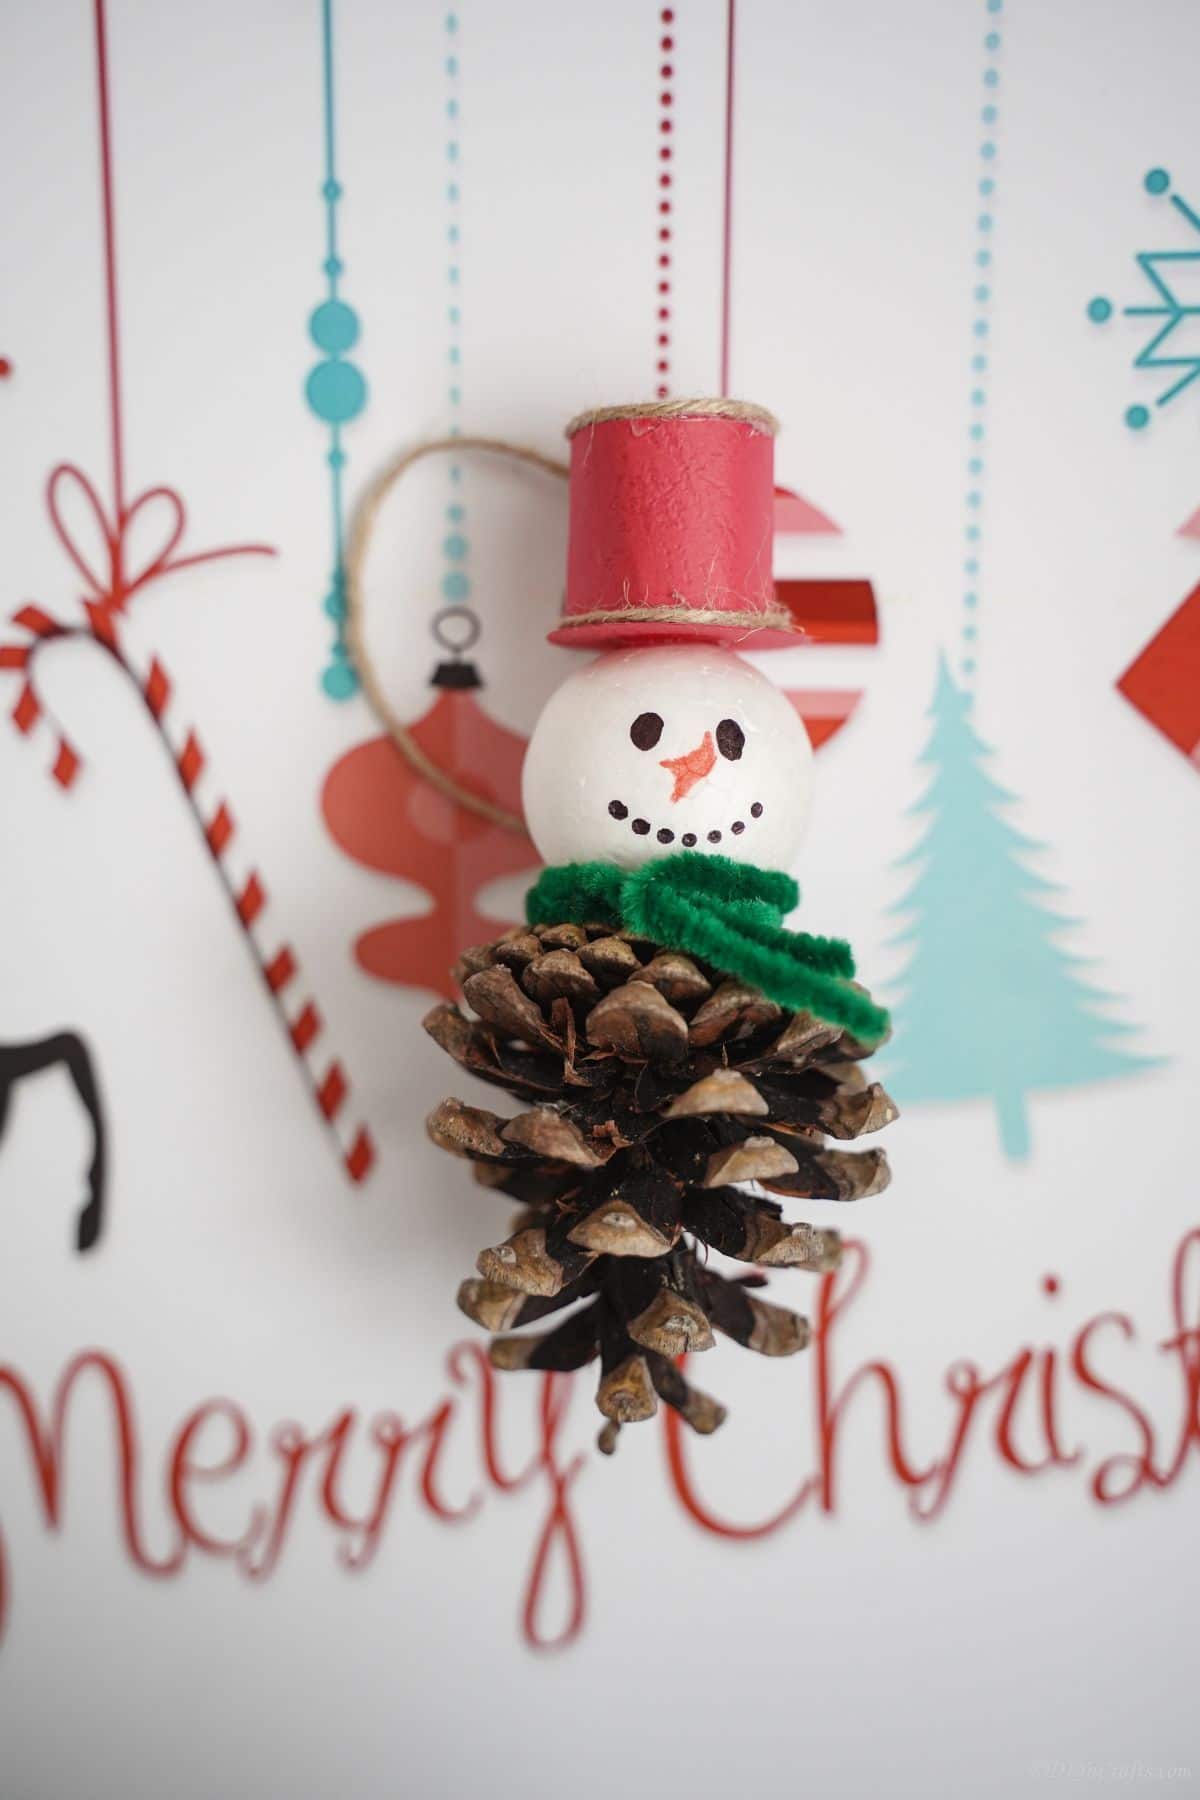 merry christmas paper behind pinecone snowman